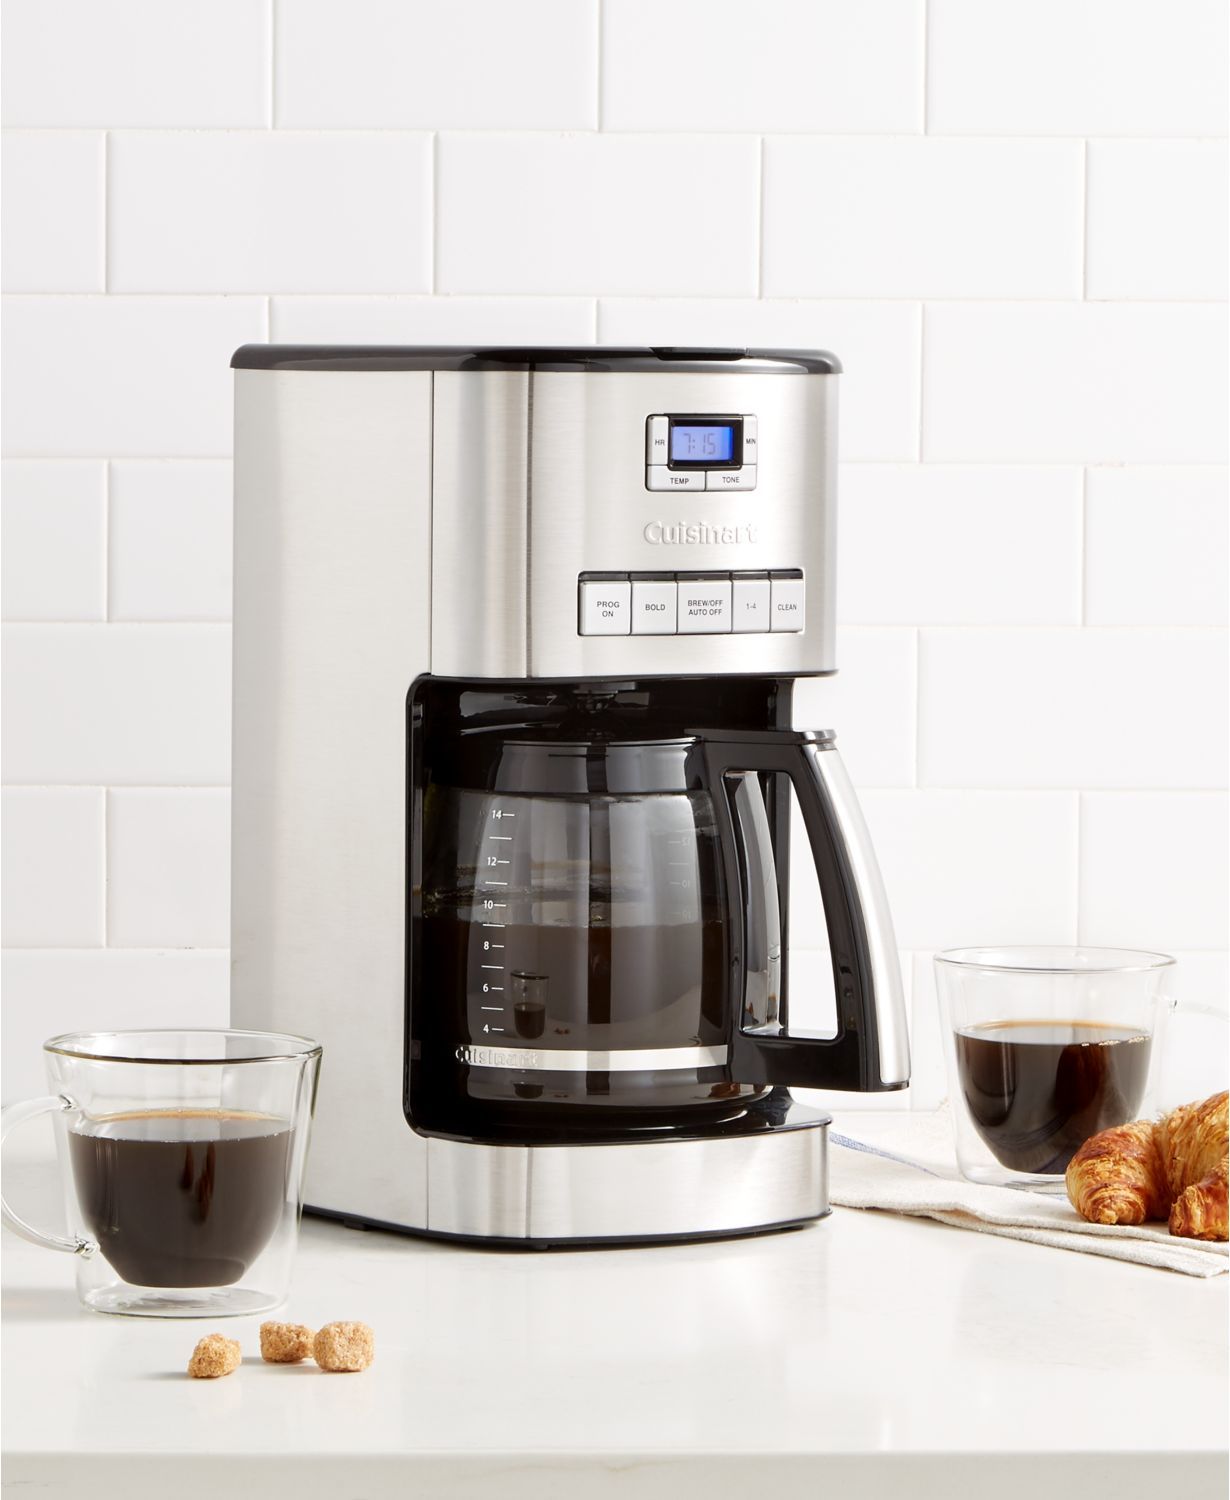 DCC-3800 14-Cup Coffeemaker, Created for Macy's